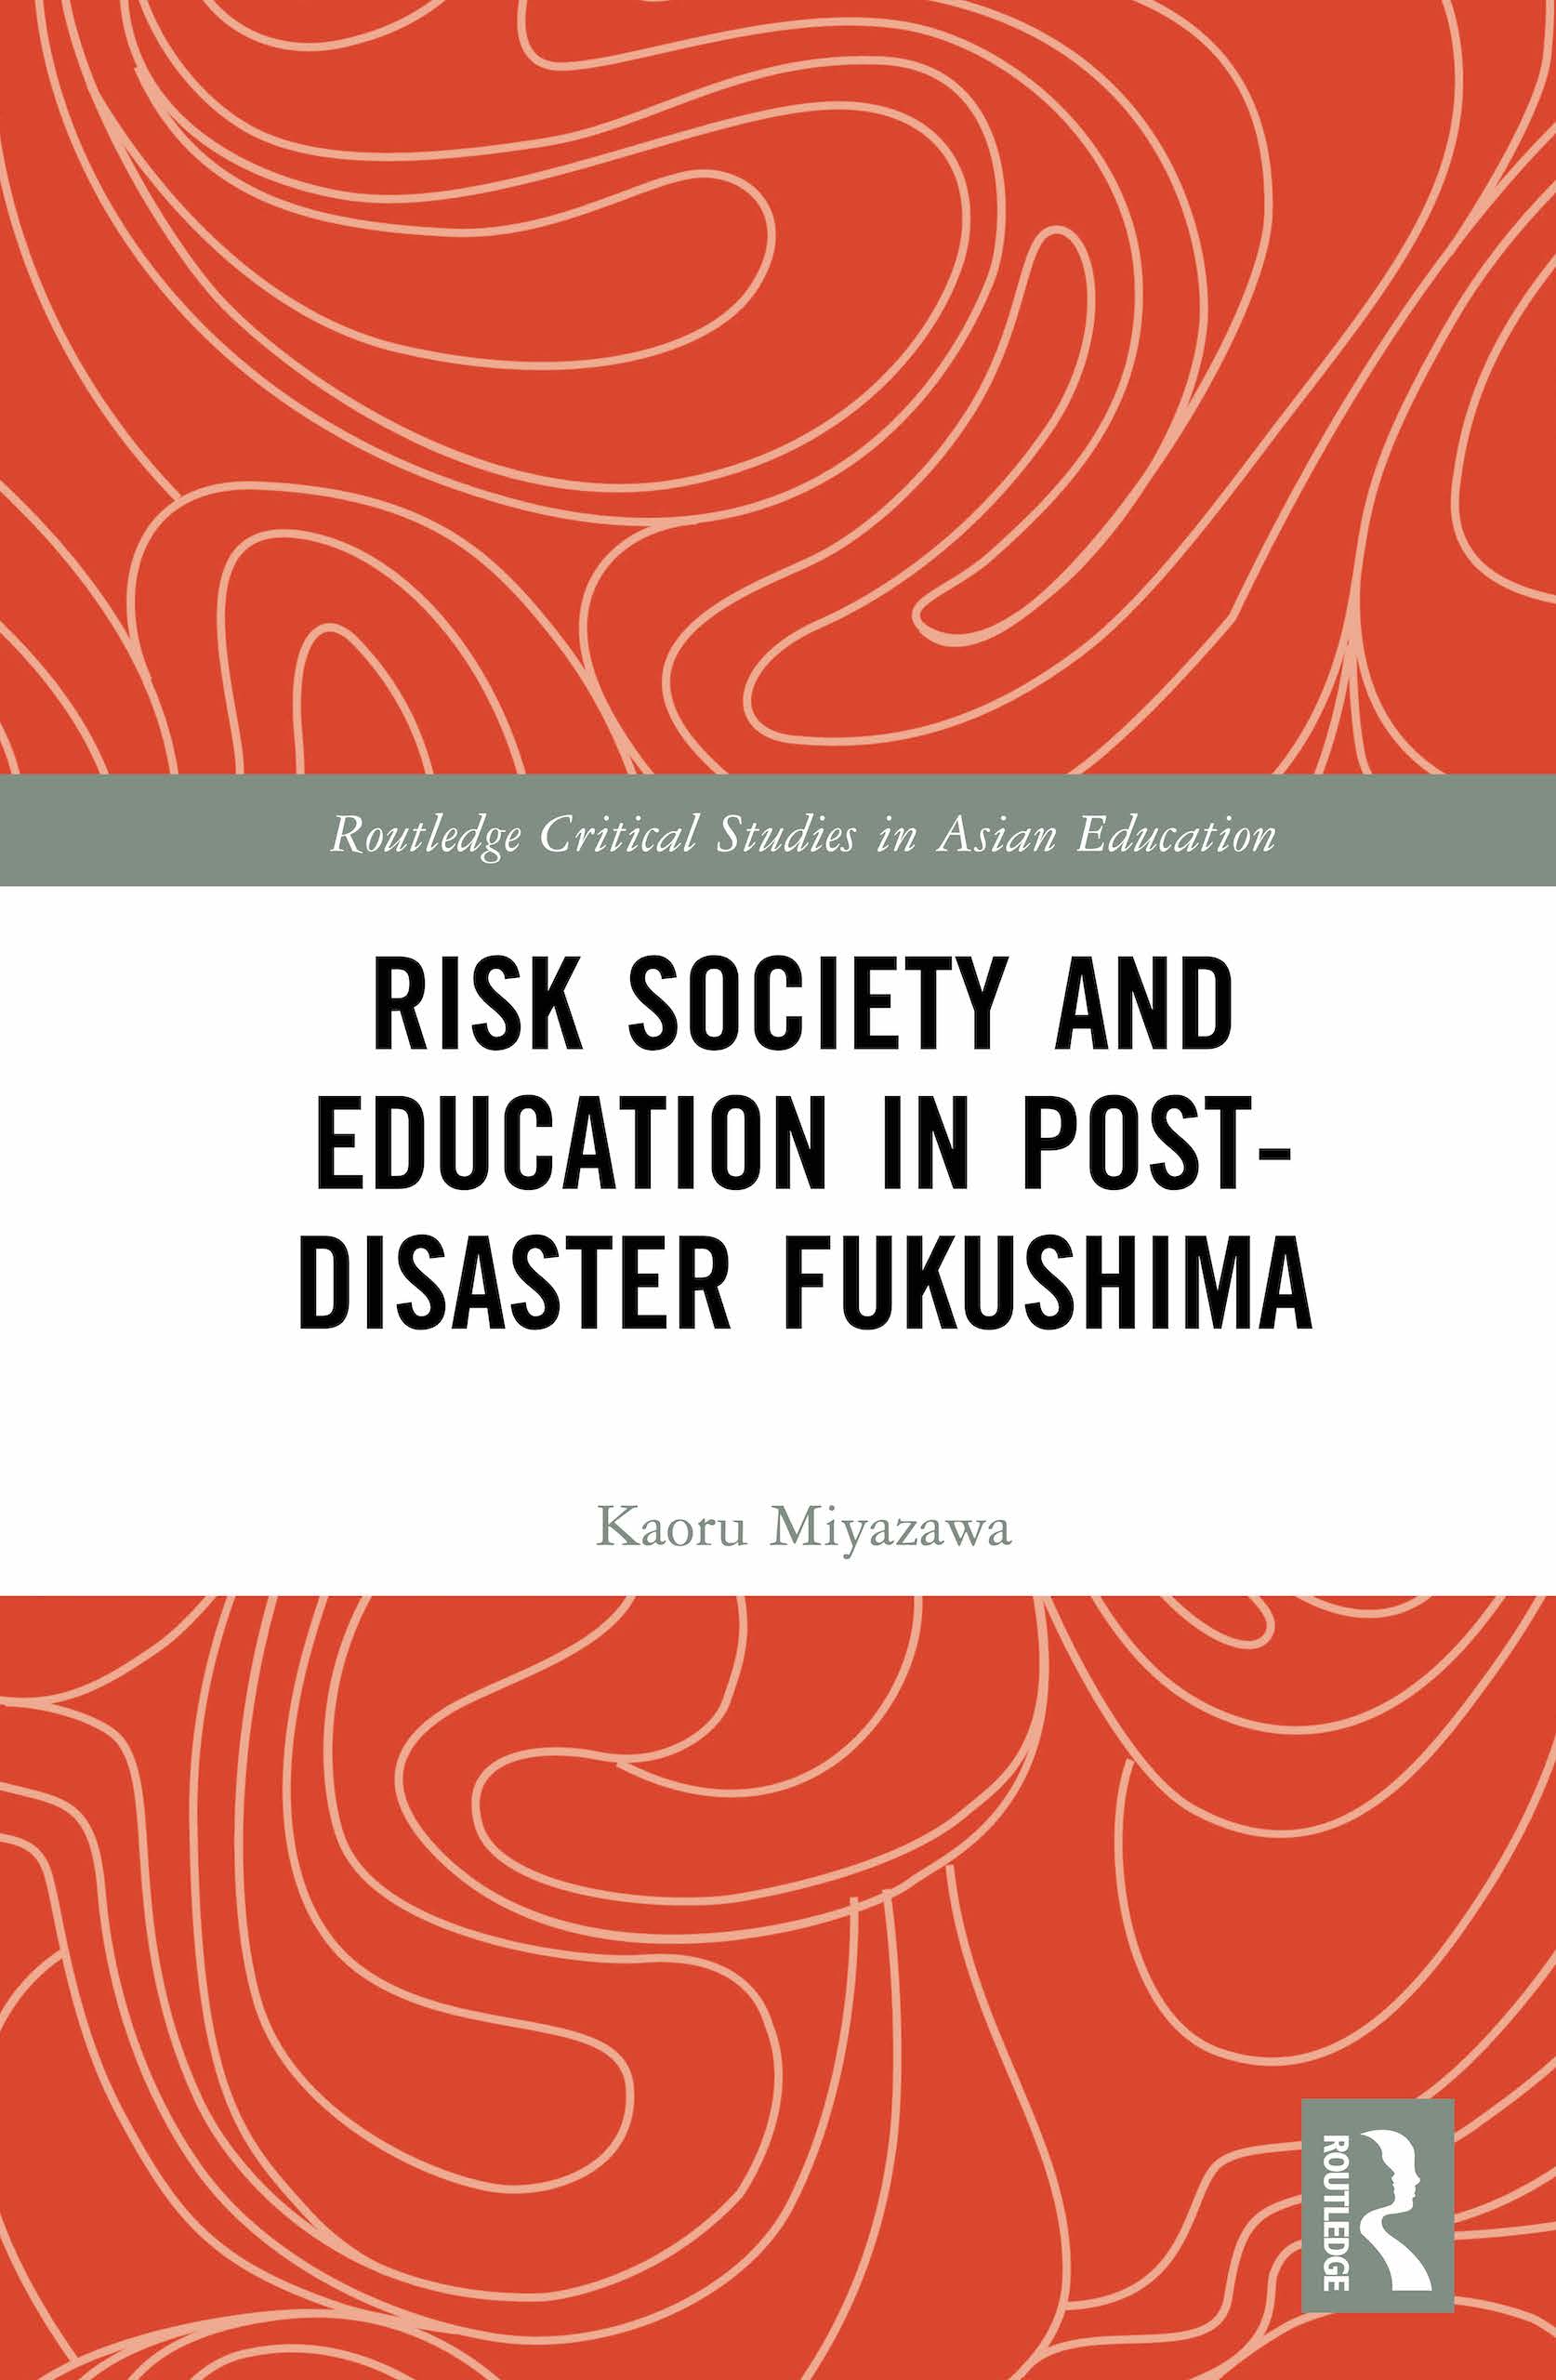 Routledge_Risk Society and Education in Post-Disaster Fukushima-scaled